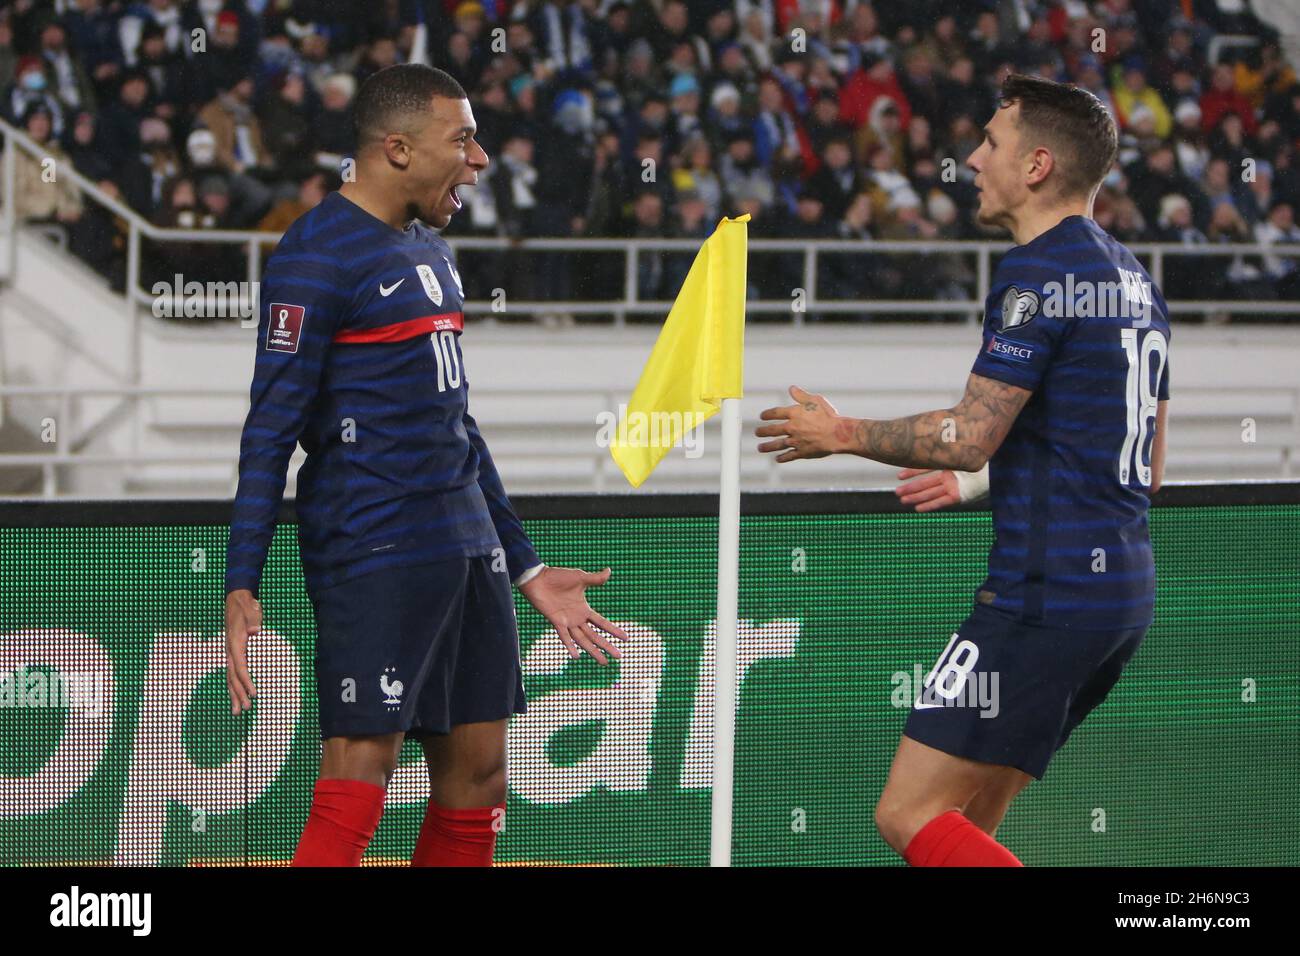 Helsinki, Finland., November 16, 2021, Kylian Mbappe celebrates after  scoring the 0-2 goal during the FIFA World Cup 2022, Qualifiers Group D  football match between Finland and France on November 16, 2021